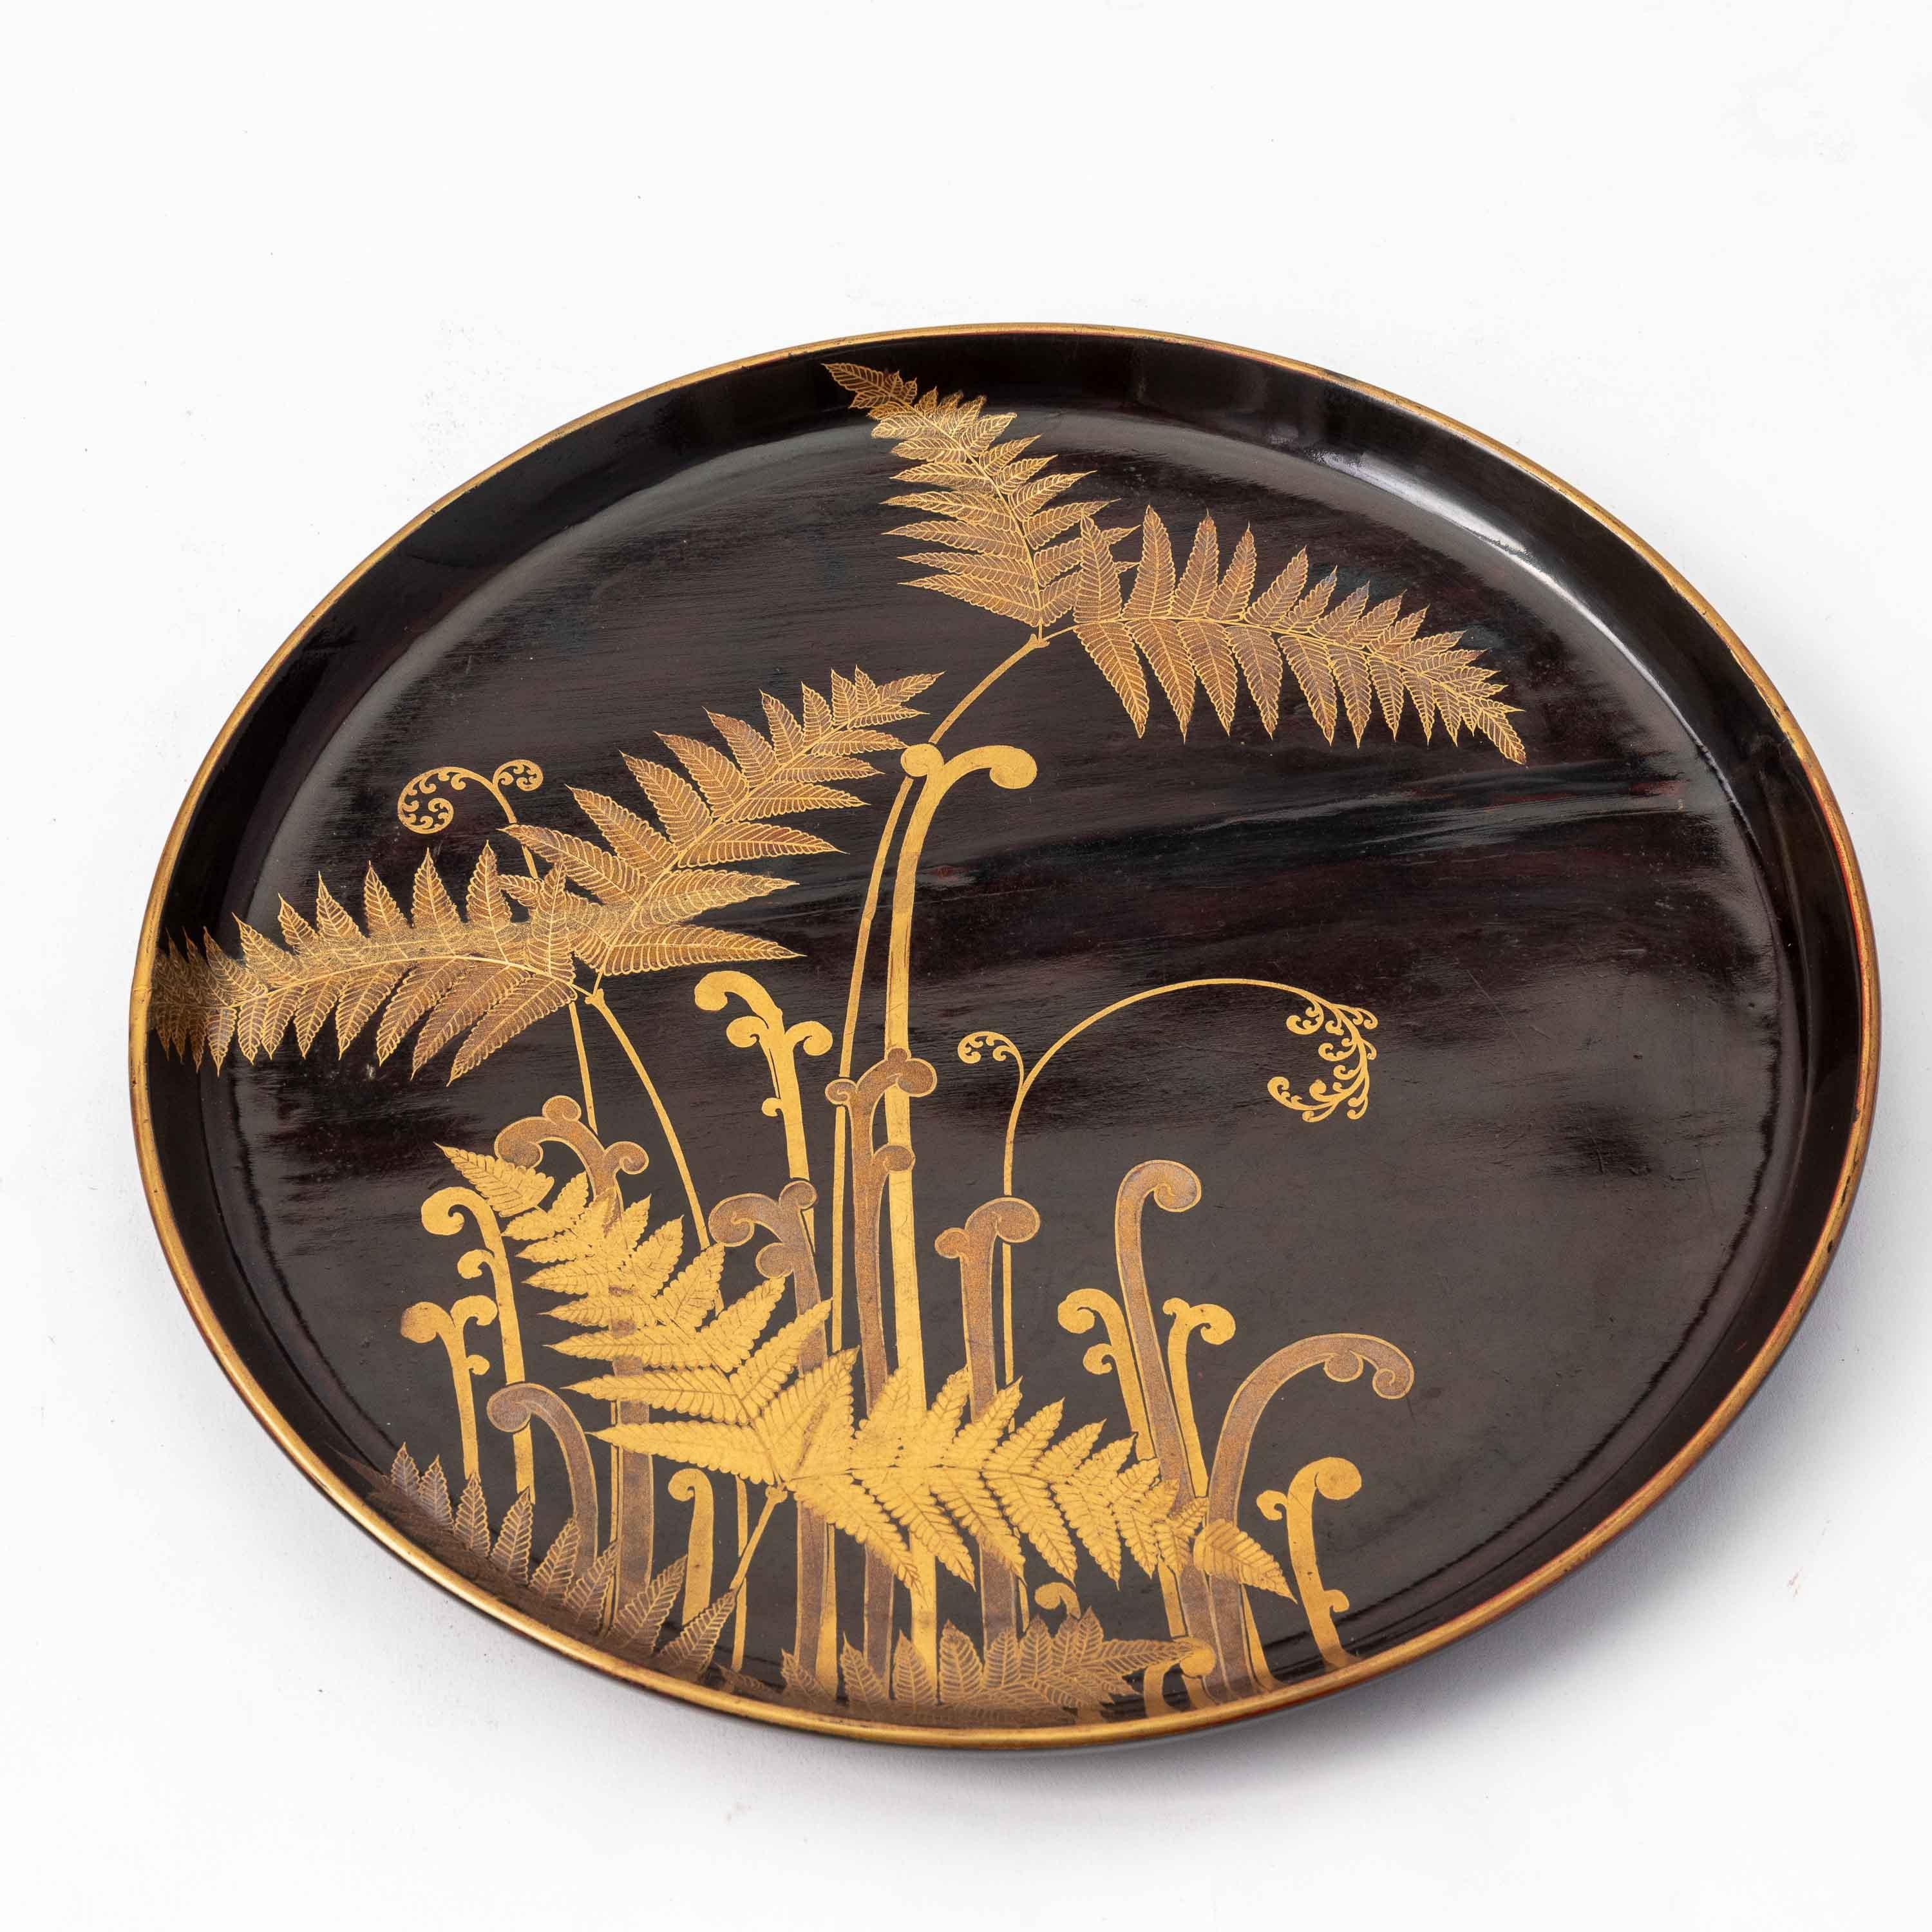 A set of nine circular black lacquer trays each with an individual botanical design of foliage or flowers in delicately wrought gold maki-e. From the Edo period, 18th century. Each design is beautiful and stands alone, however when displayed